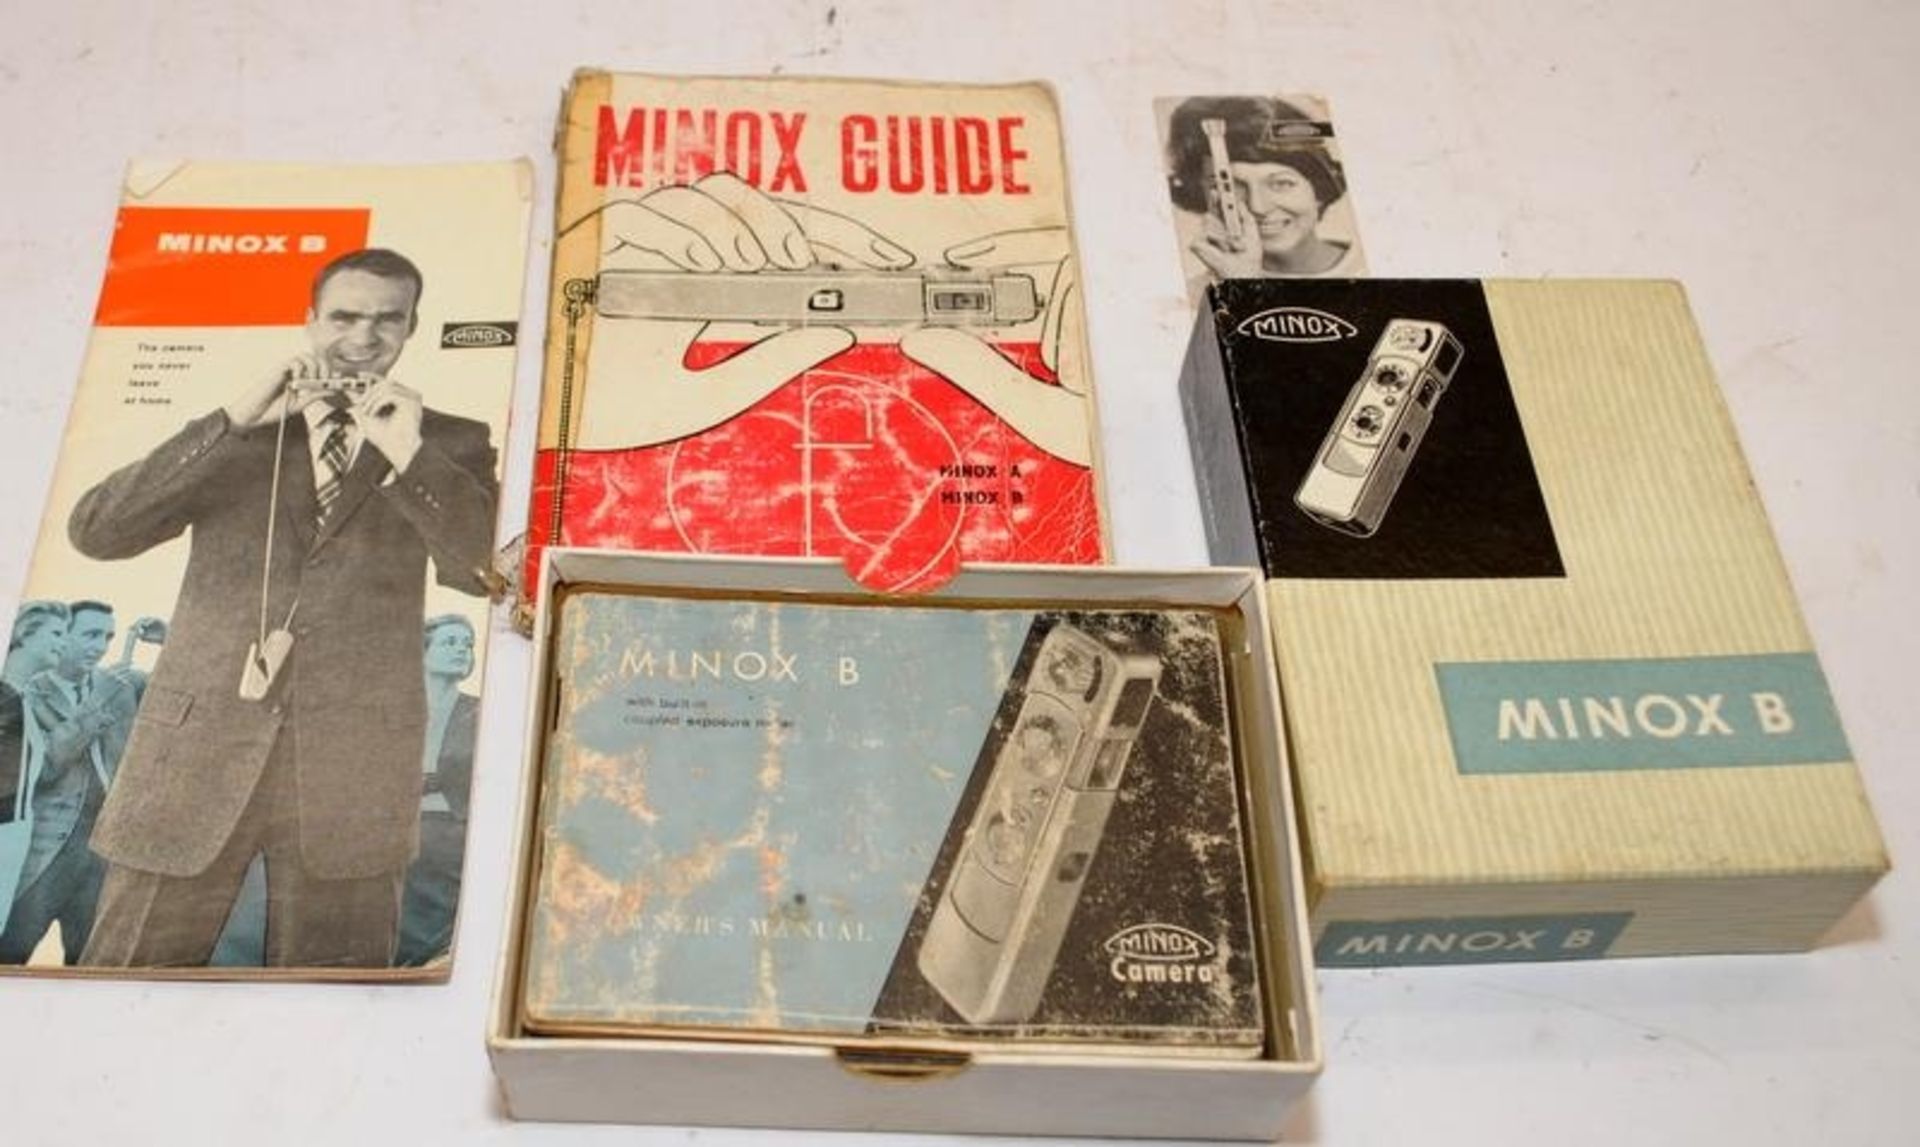 Vintage Minox B sub miniature spy camera. Rare in such good order complete in original box with - Image 5 of 7